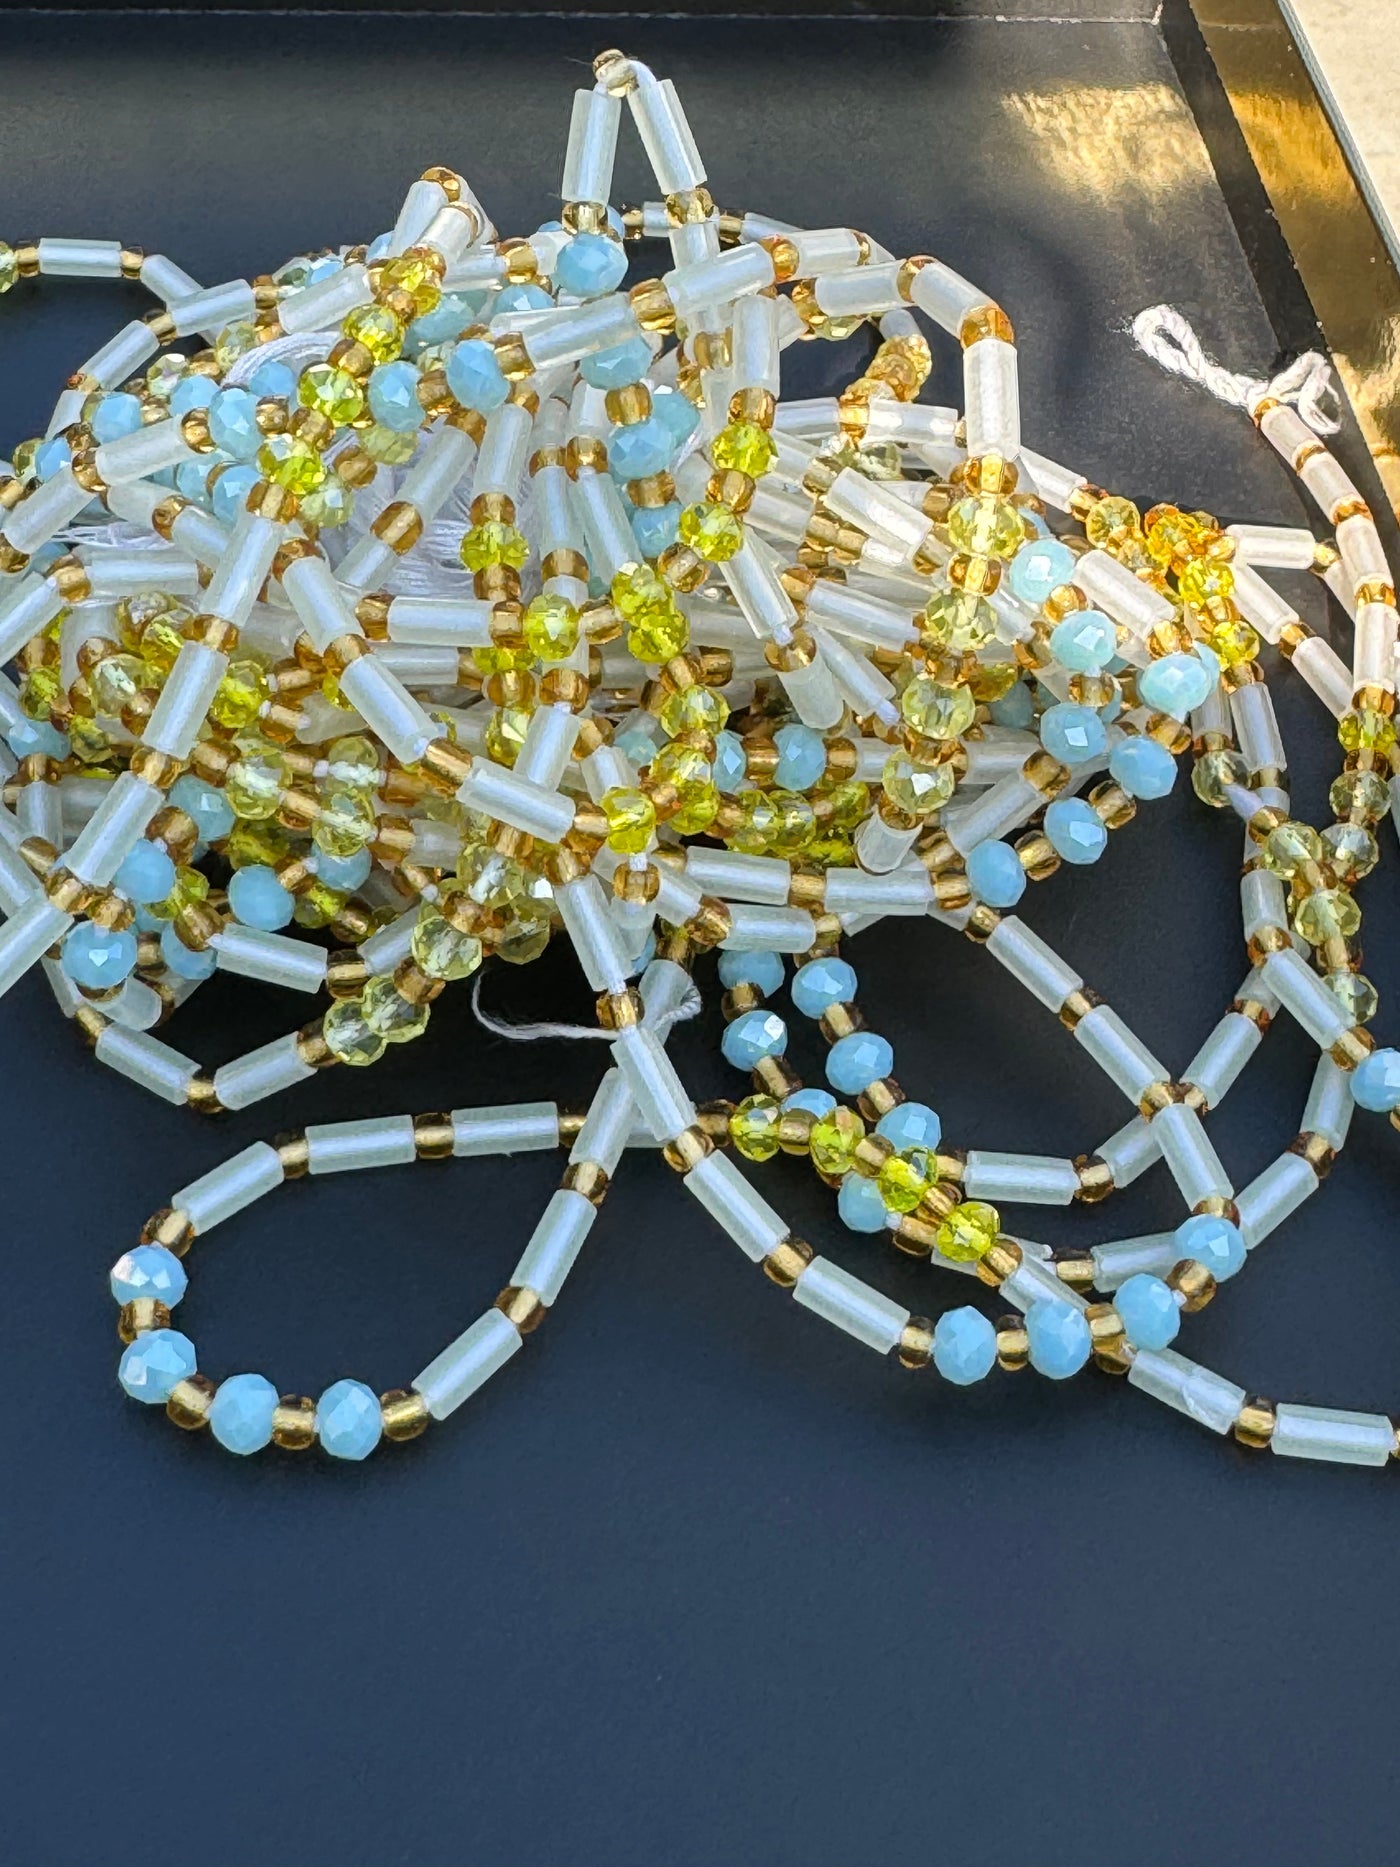 Nia (Purpose) Authentic Glow in Dark Ghana Blue Gold Yellow Waistbeads 46 inches (Wholesale)